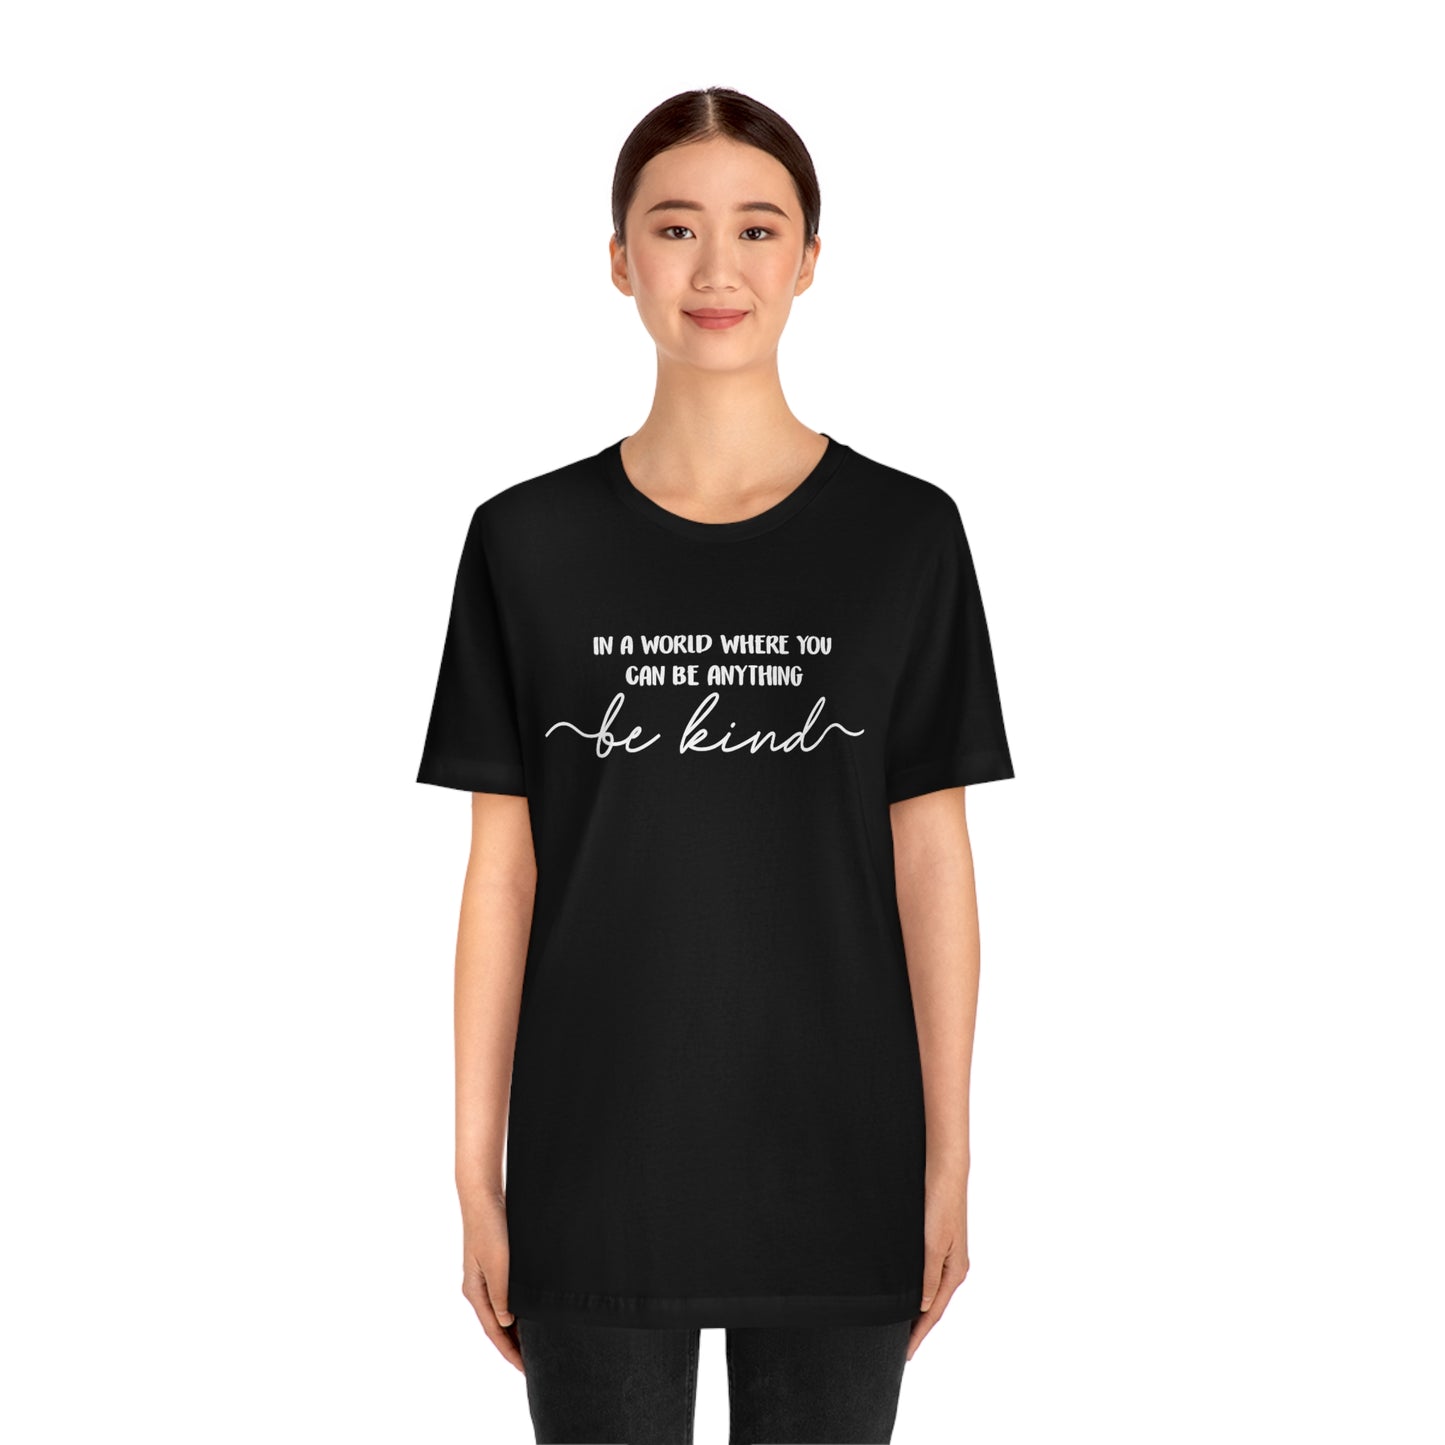 Be Kind Shirt, In A World Where You Can Be Anything Be Kind Shirt, Kindness Shirt, Teacher Shirt, Anti-Racism Shirt, Bible Verse Shirt